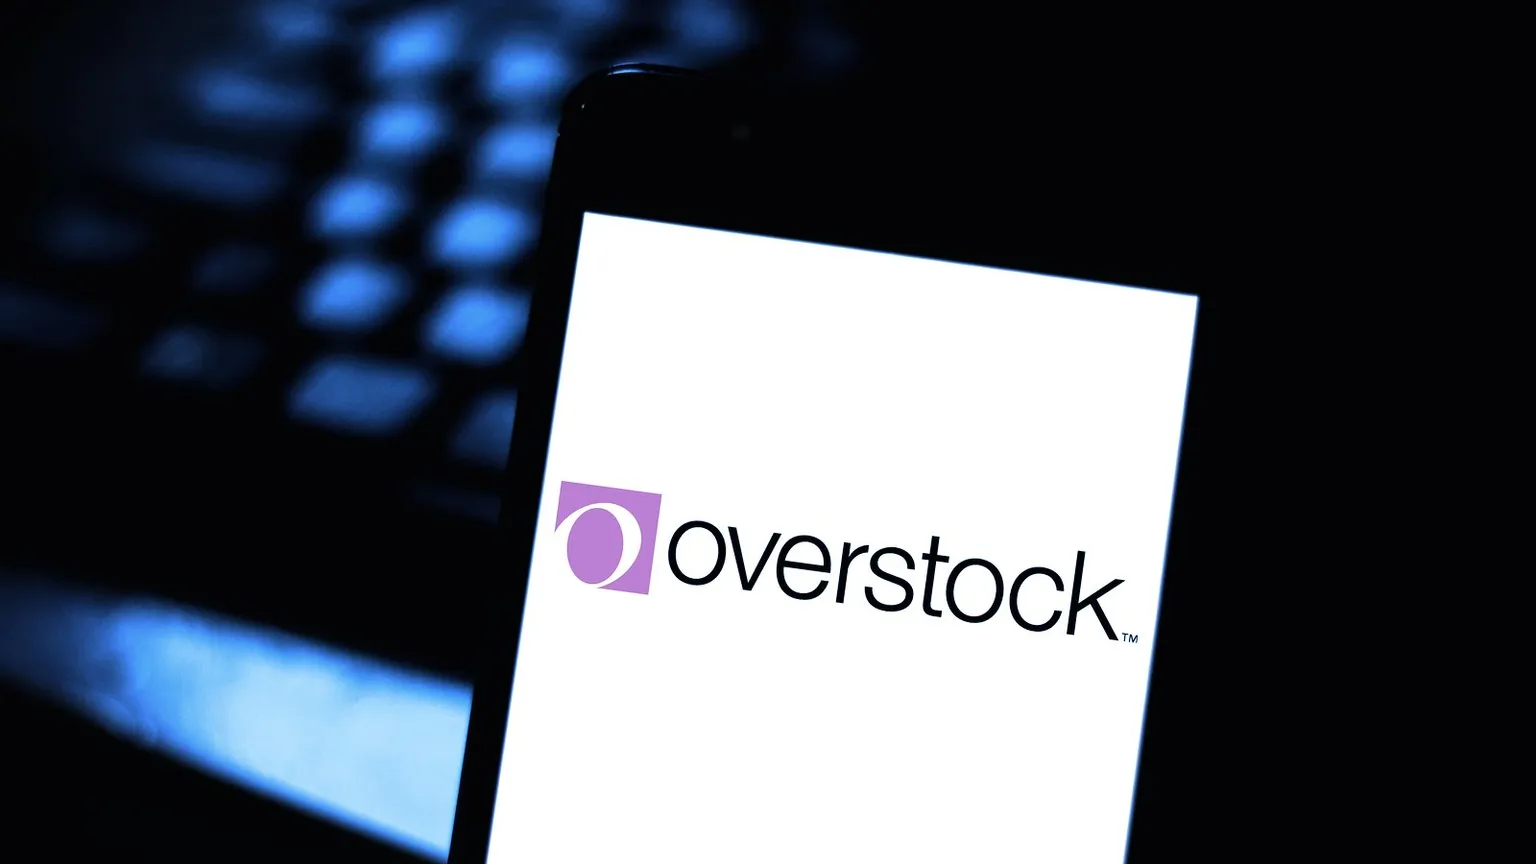 Patrick Byrne is former CEO of Overstock. Image: Shutterstock